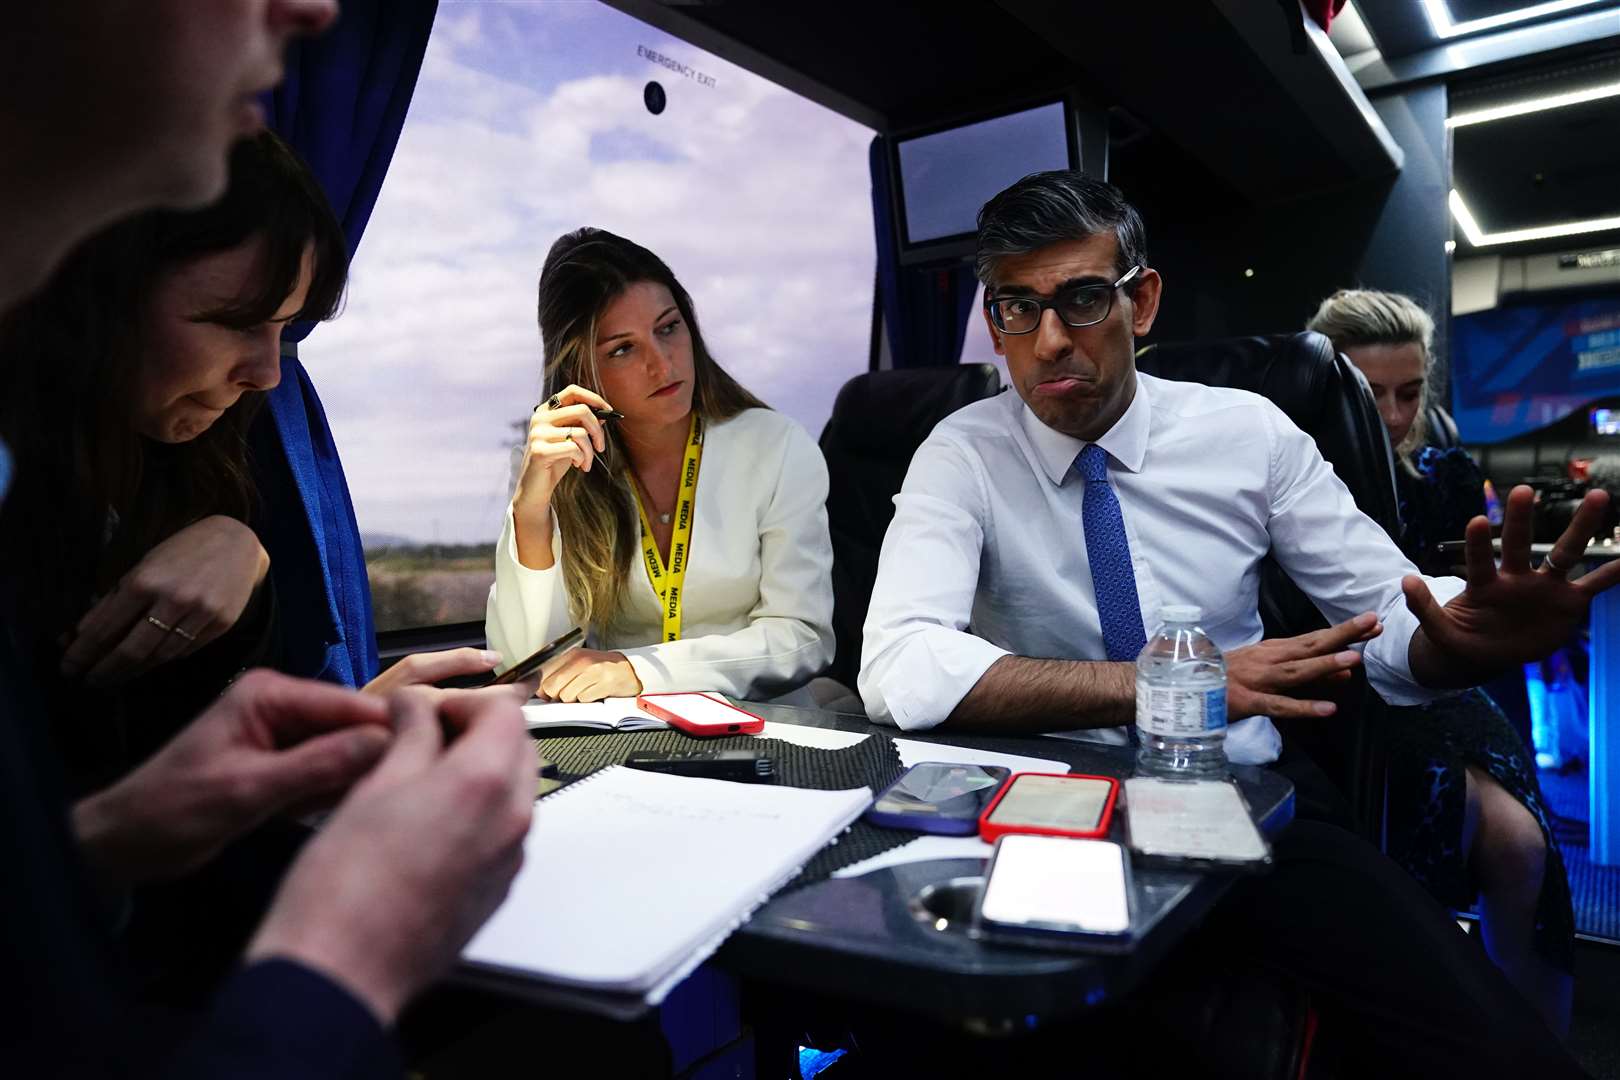 Prime Minister Rishi Sunak talks to journalists on board his campaign battle bus during the election campaign (Aaron Chown/PA)